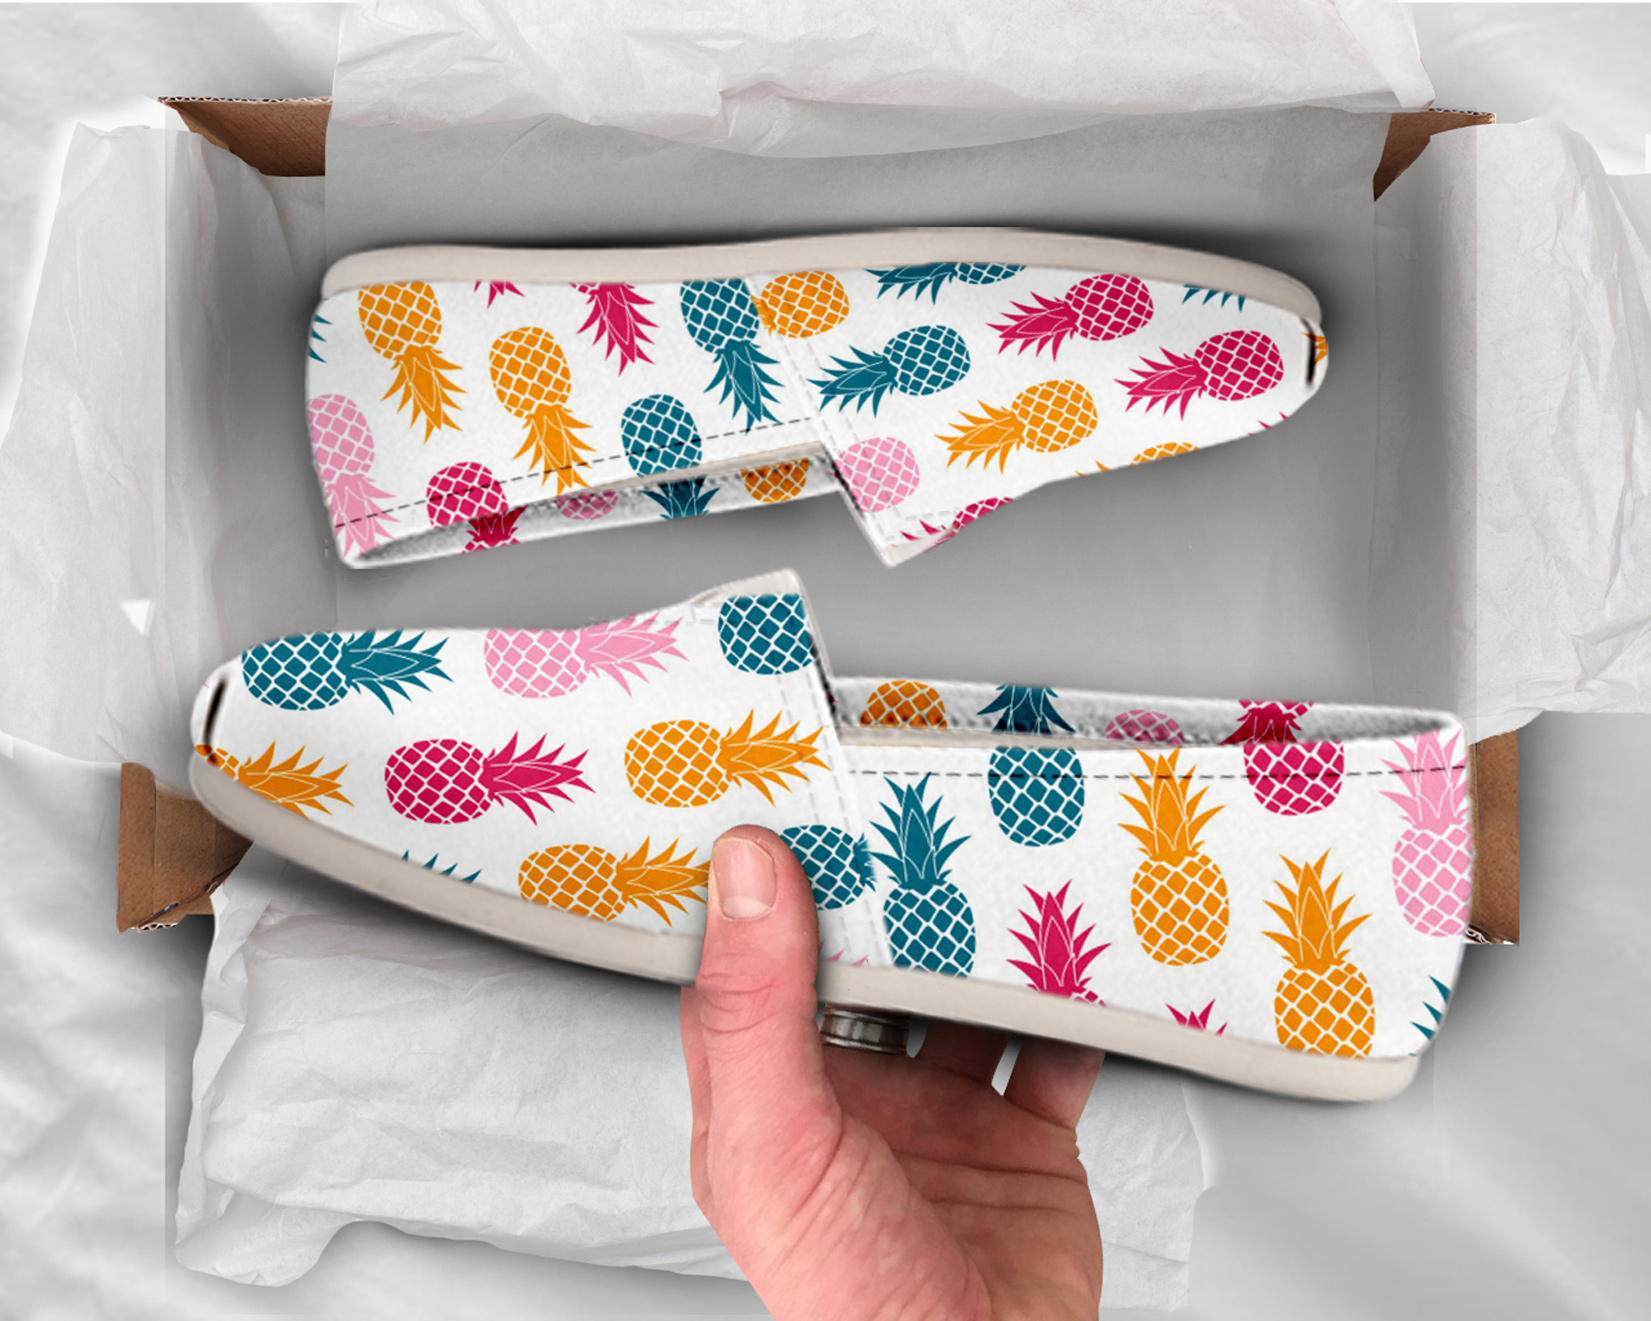 Cool Pineapple Shoes | Custom Canvas Sneakers For Kids & Adults